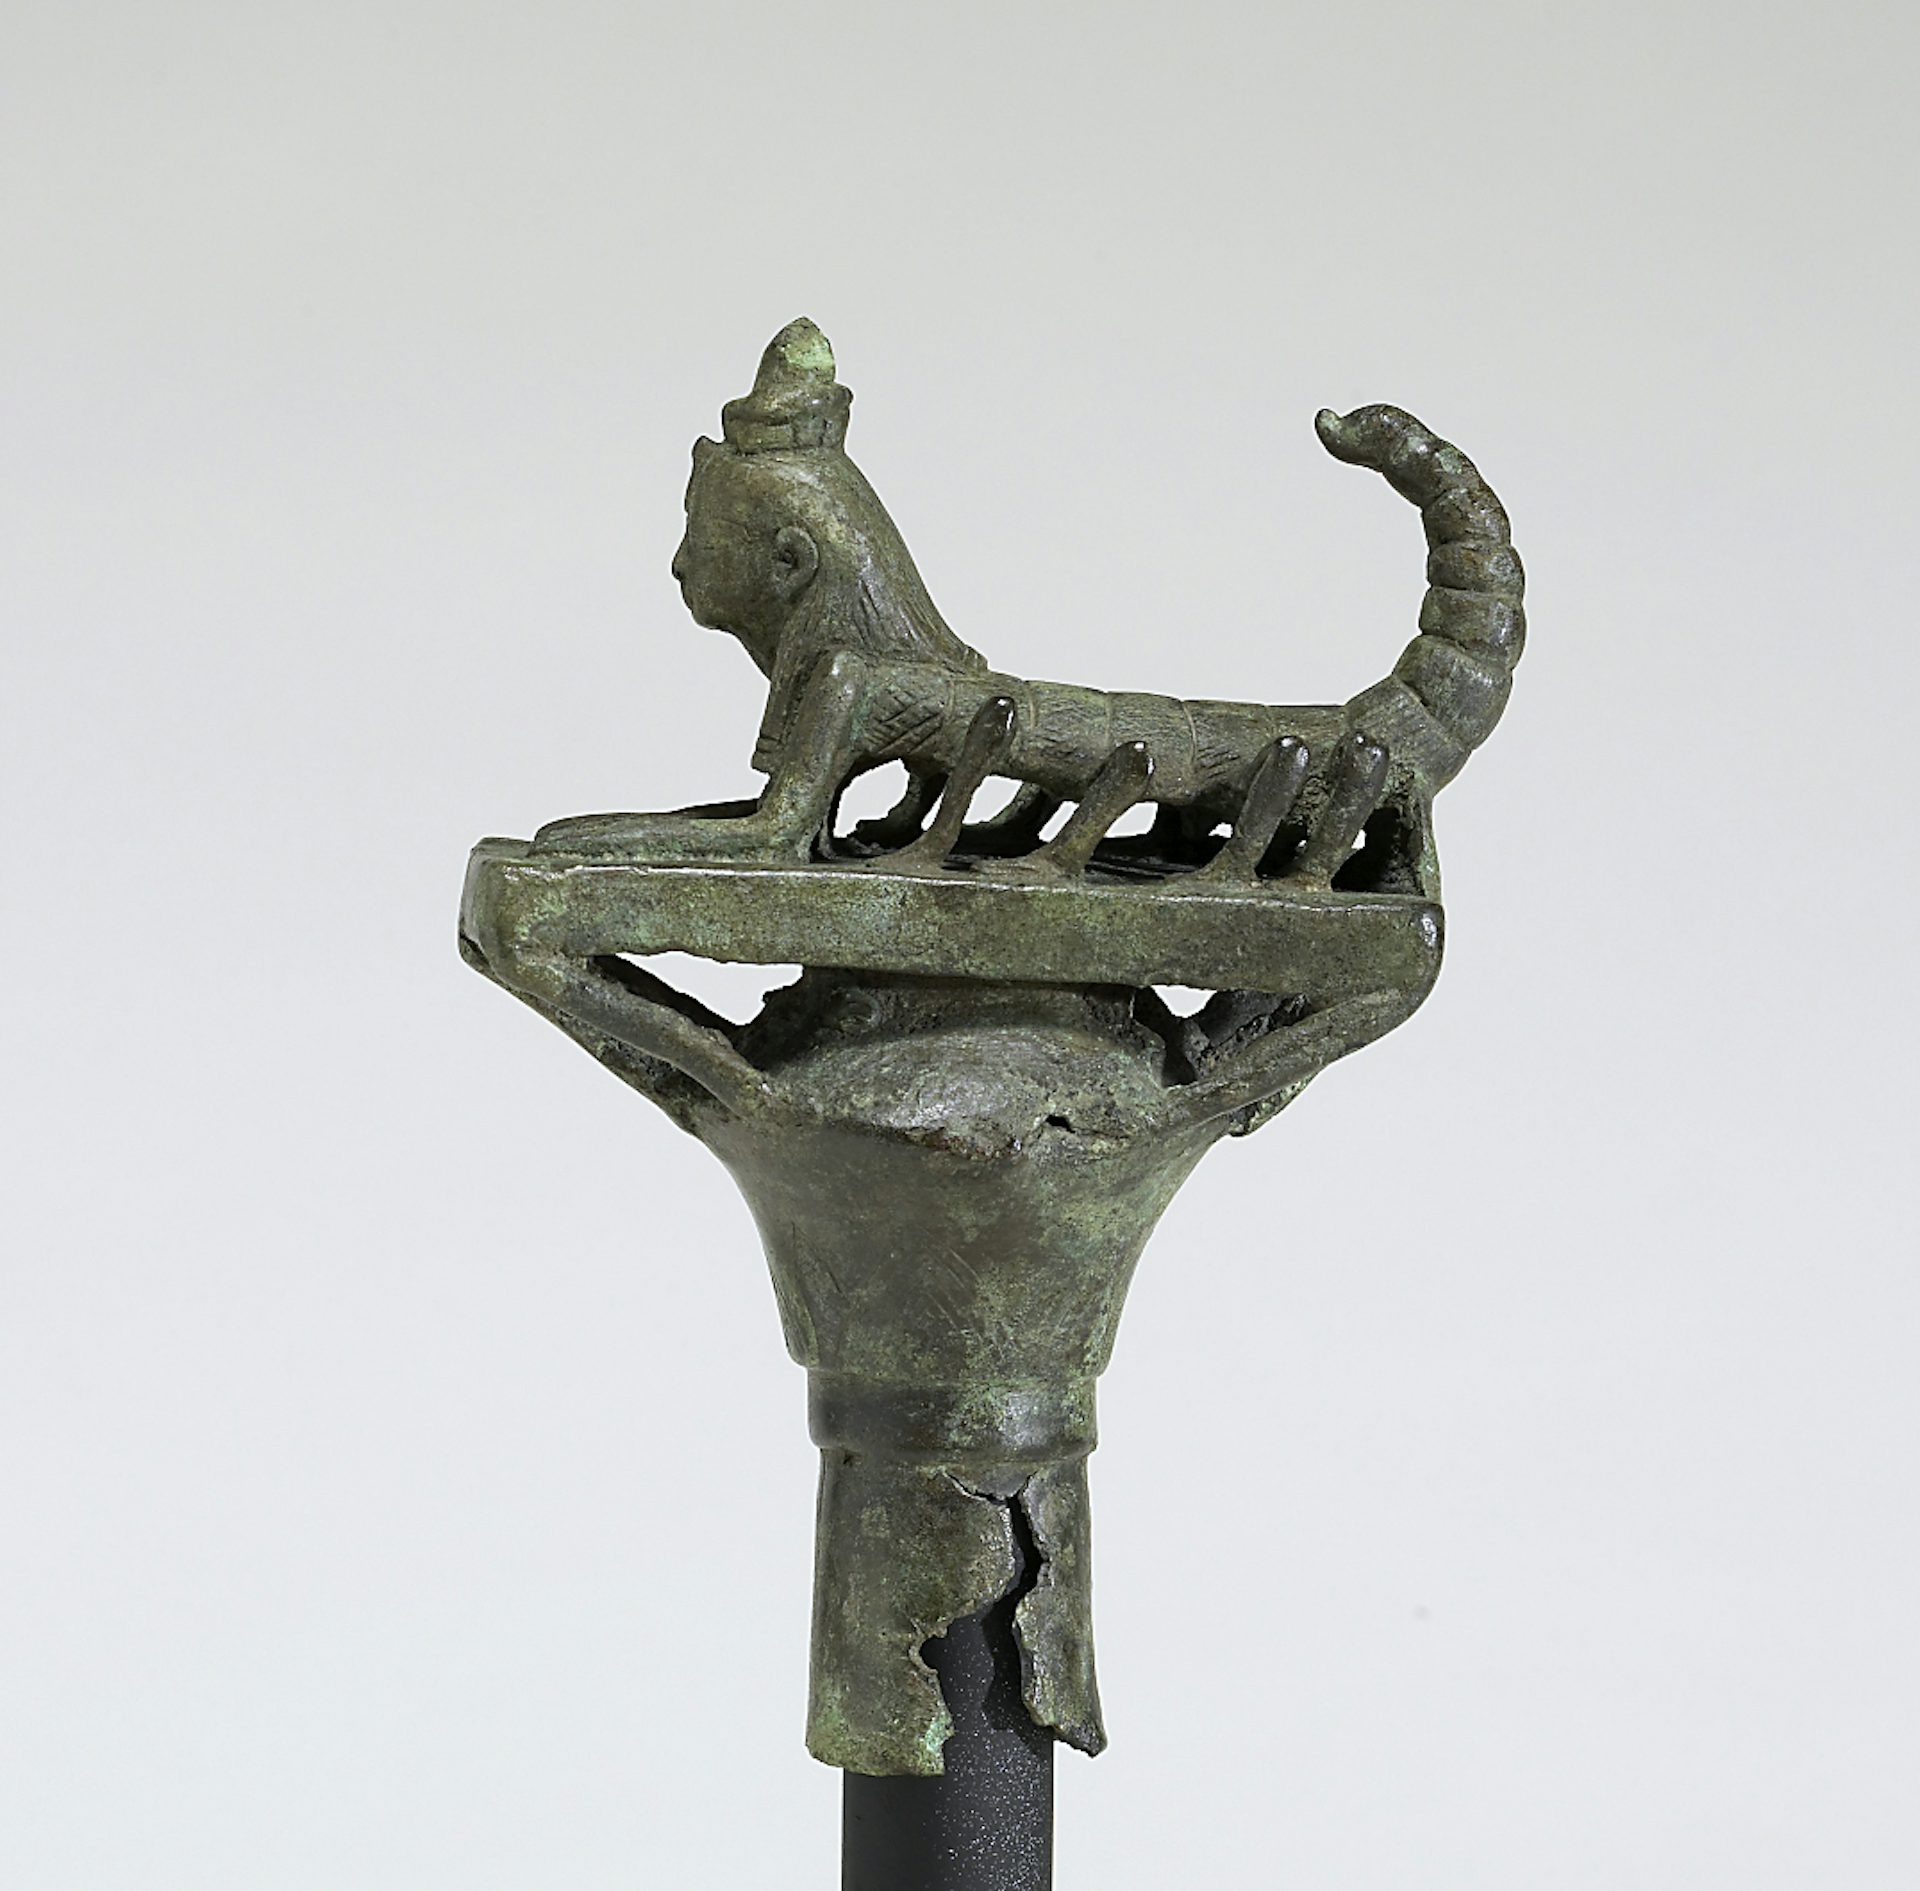 scepter ornament with figure of Isis-Serget